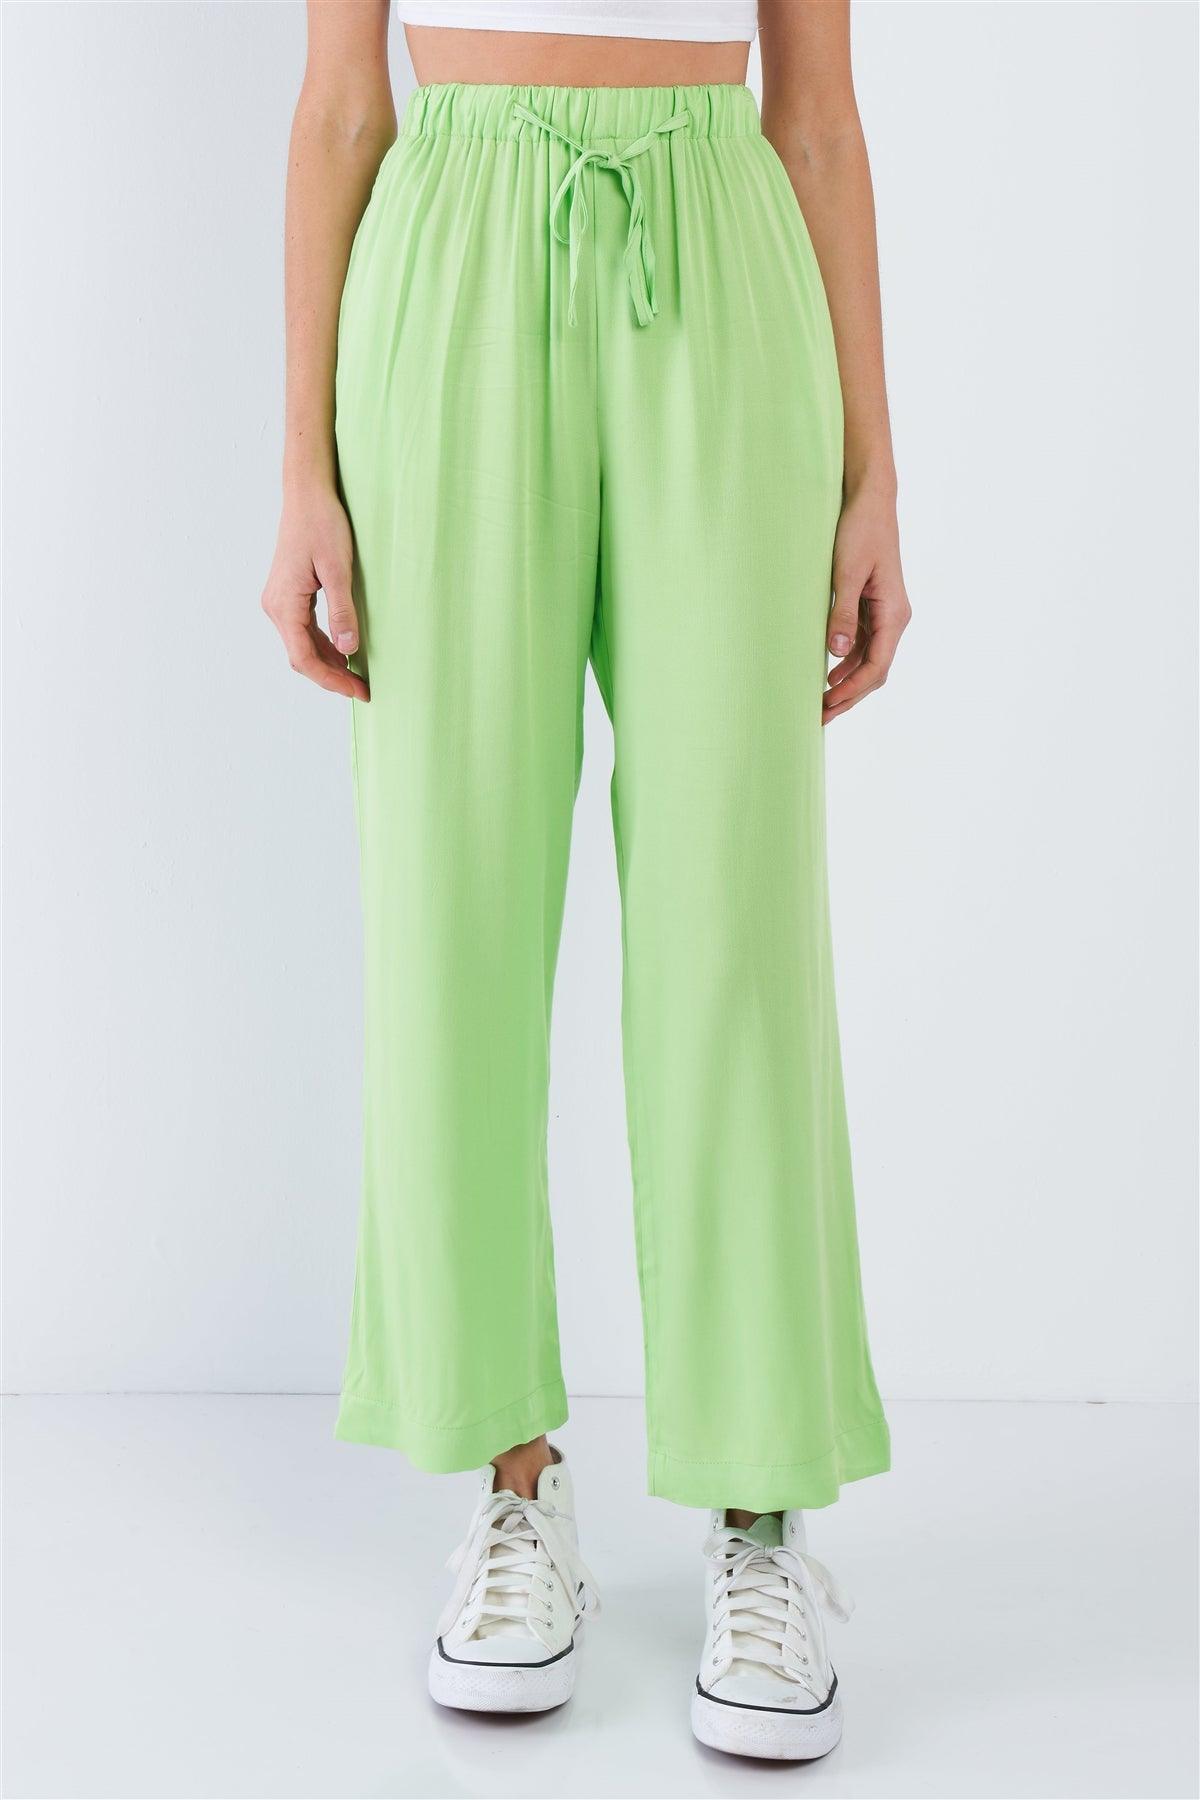 Neon Green Cotton Relaxed Fit Casual Wide Leg Ankle Pant   /3-2-1